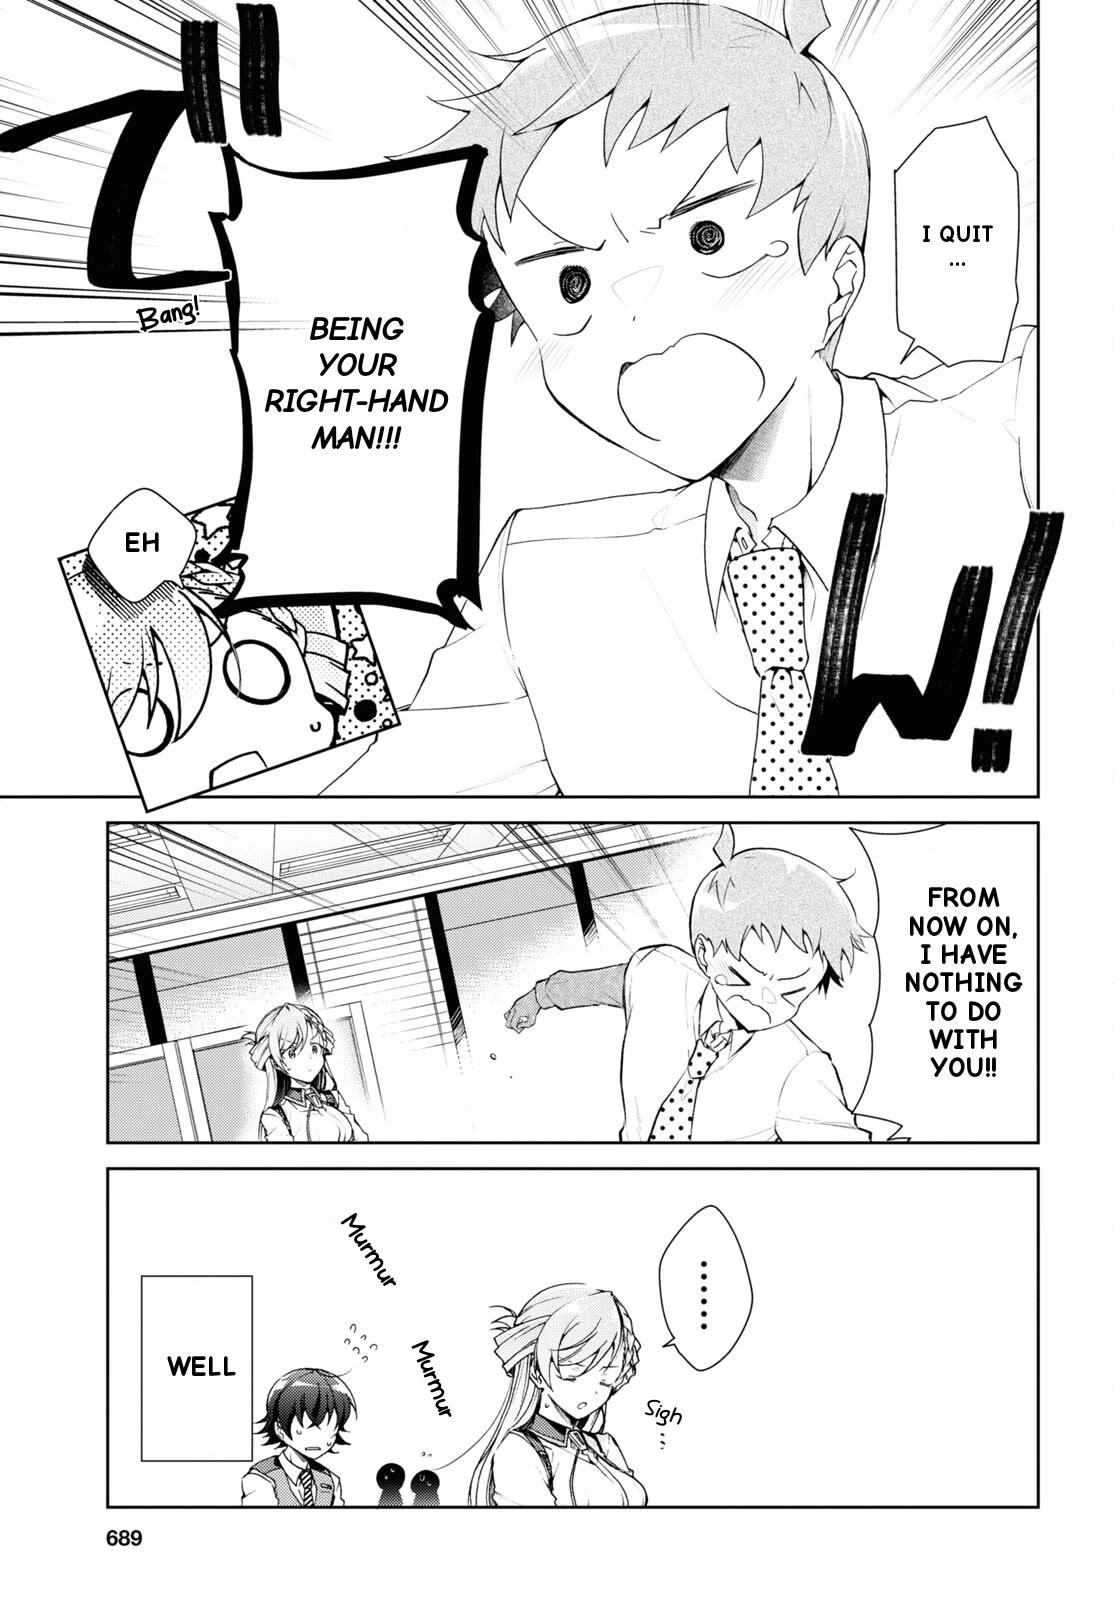 Isshiki-san Wants to Know About Love. - chapter 33 - #6